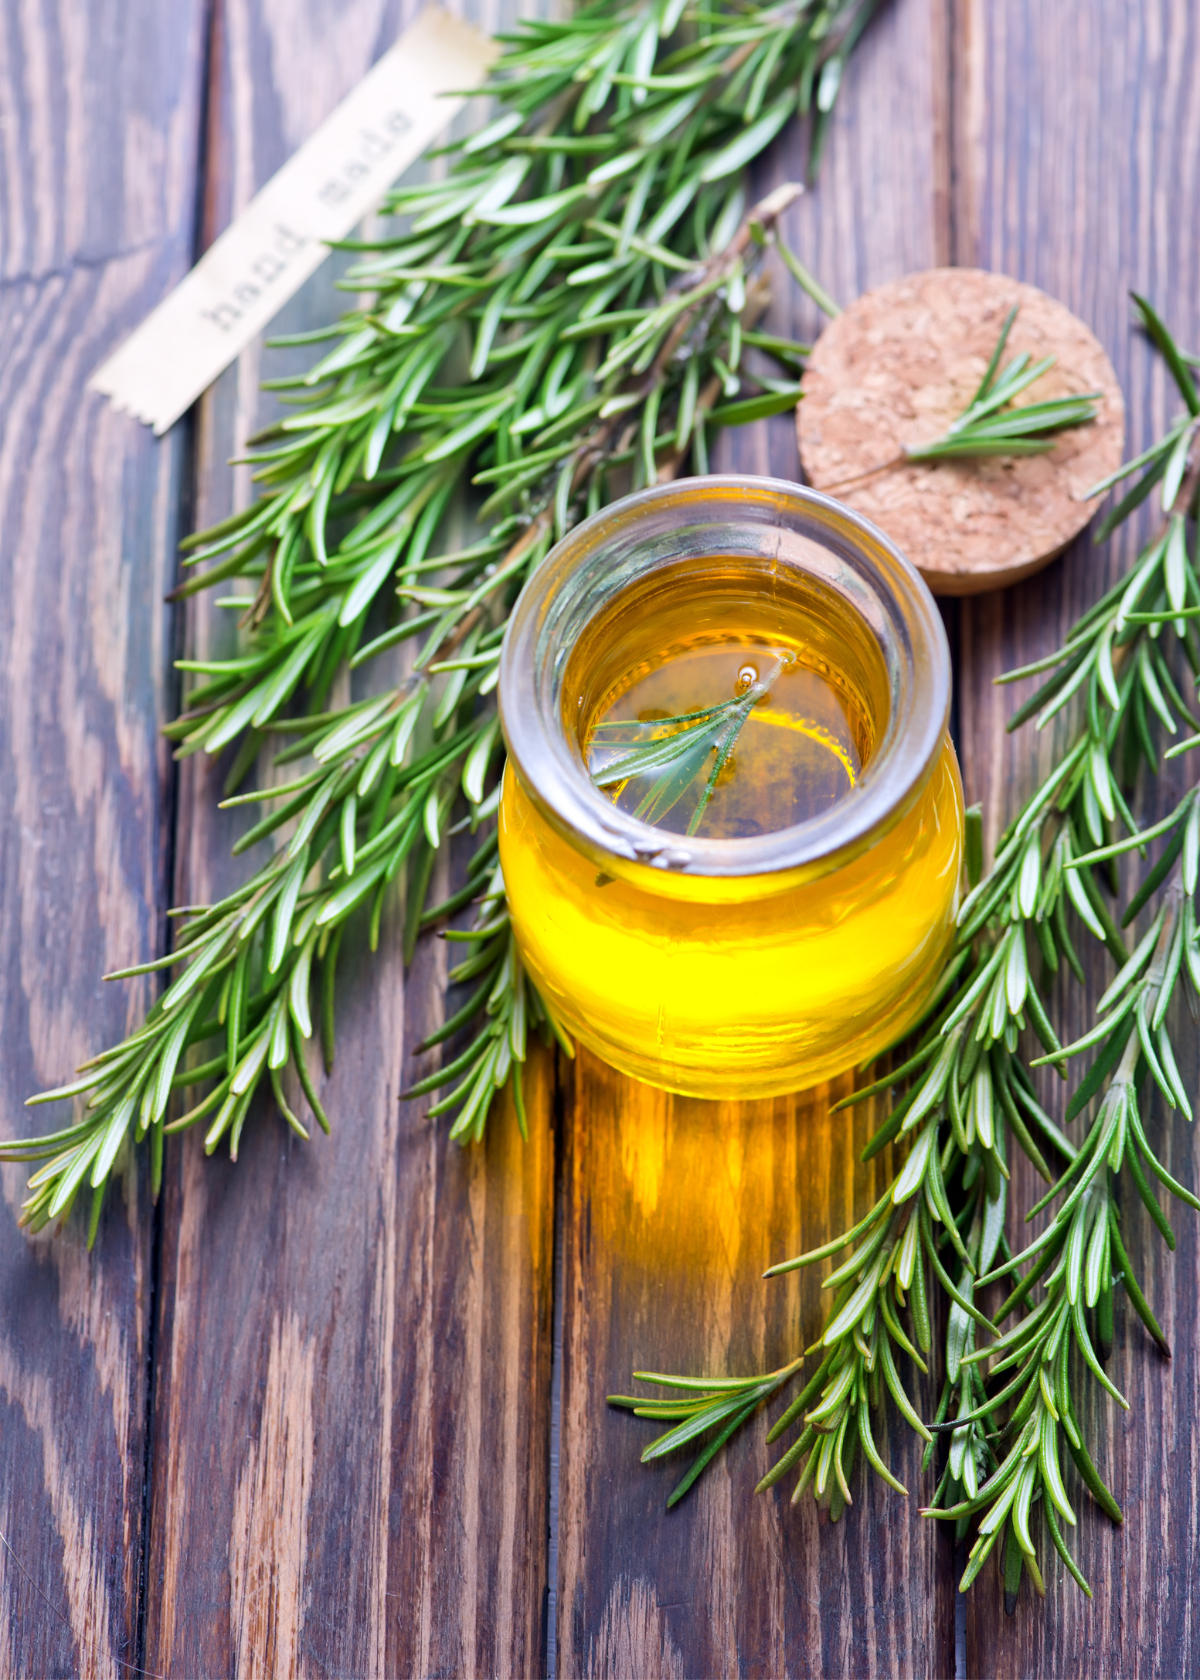 3 Best Pure Rosemary Oils For Hair, Nails, and Skin